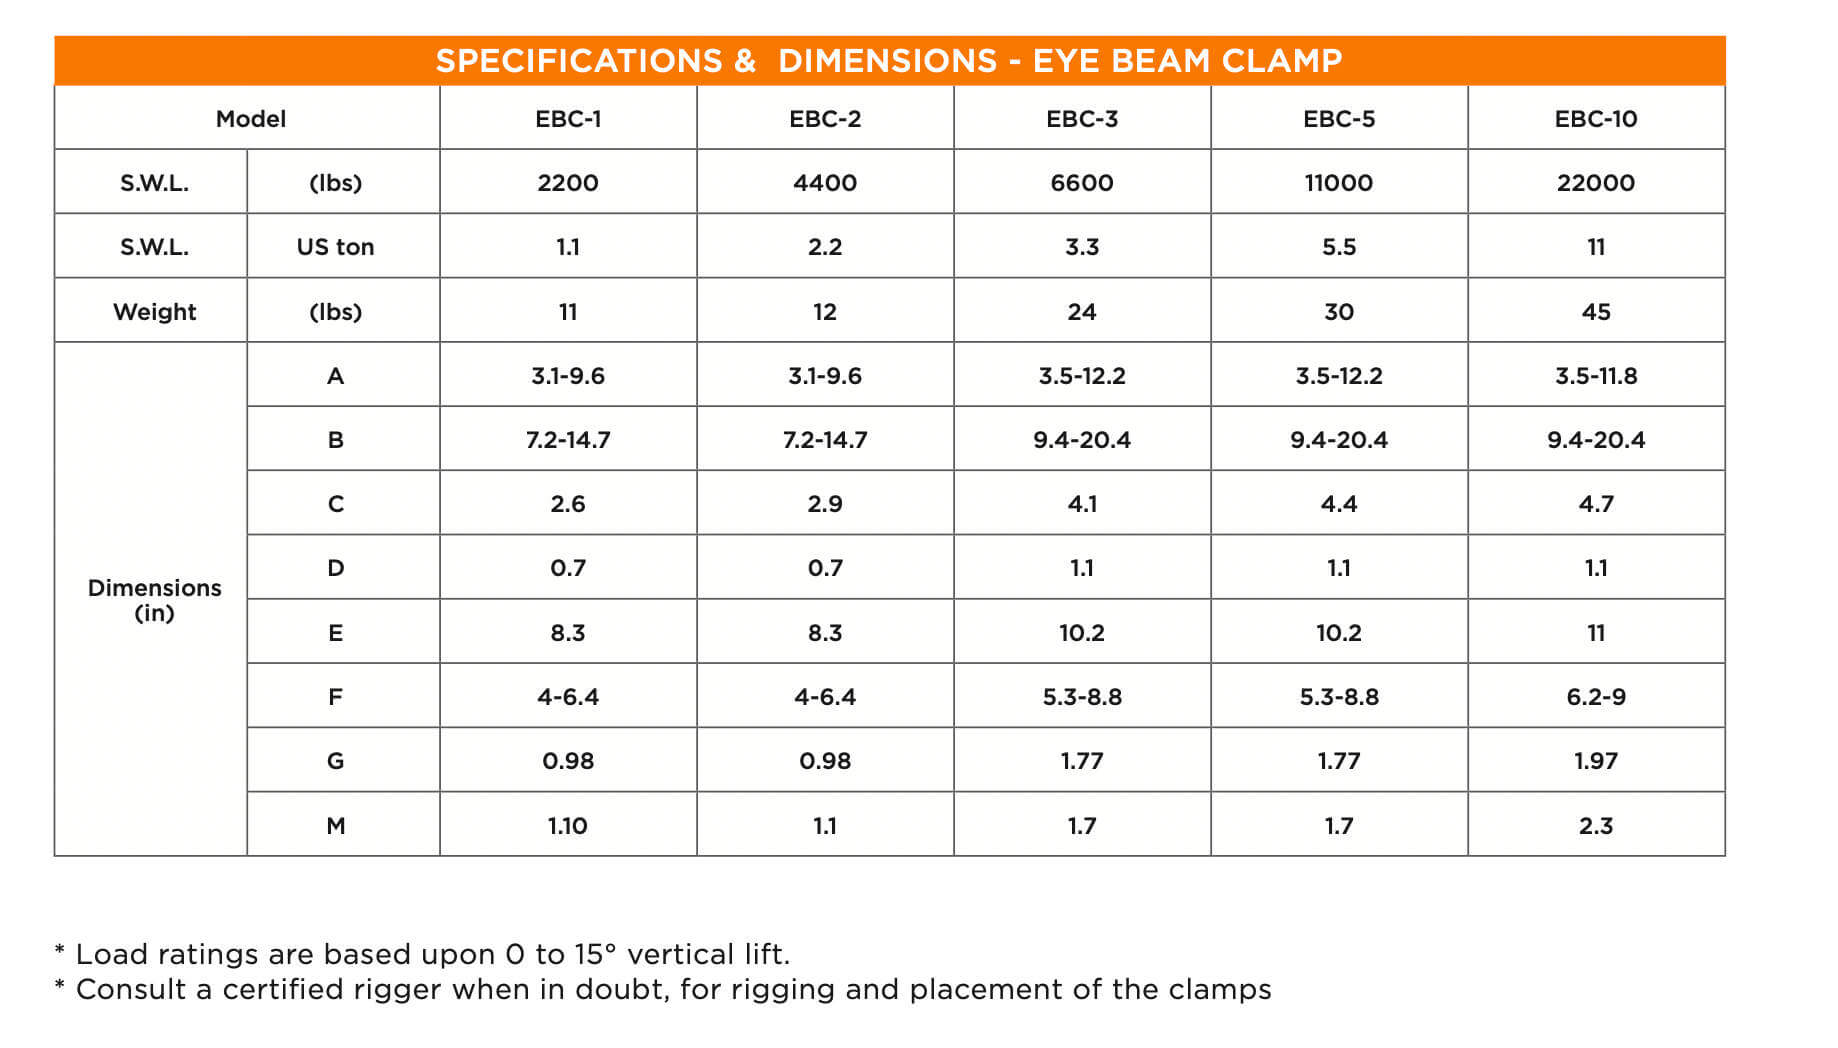 Elephant Eye Series Beam Clamp specifications